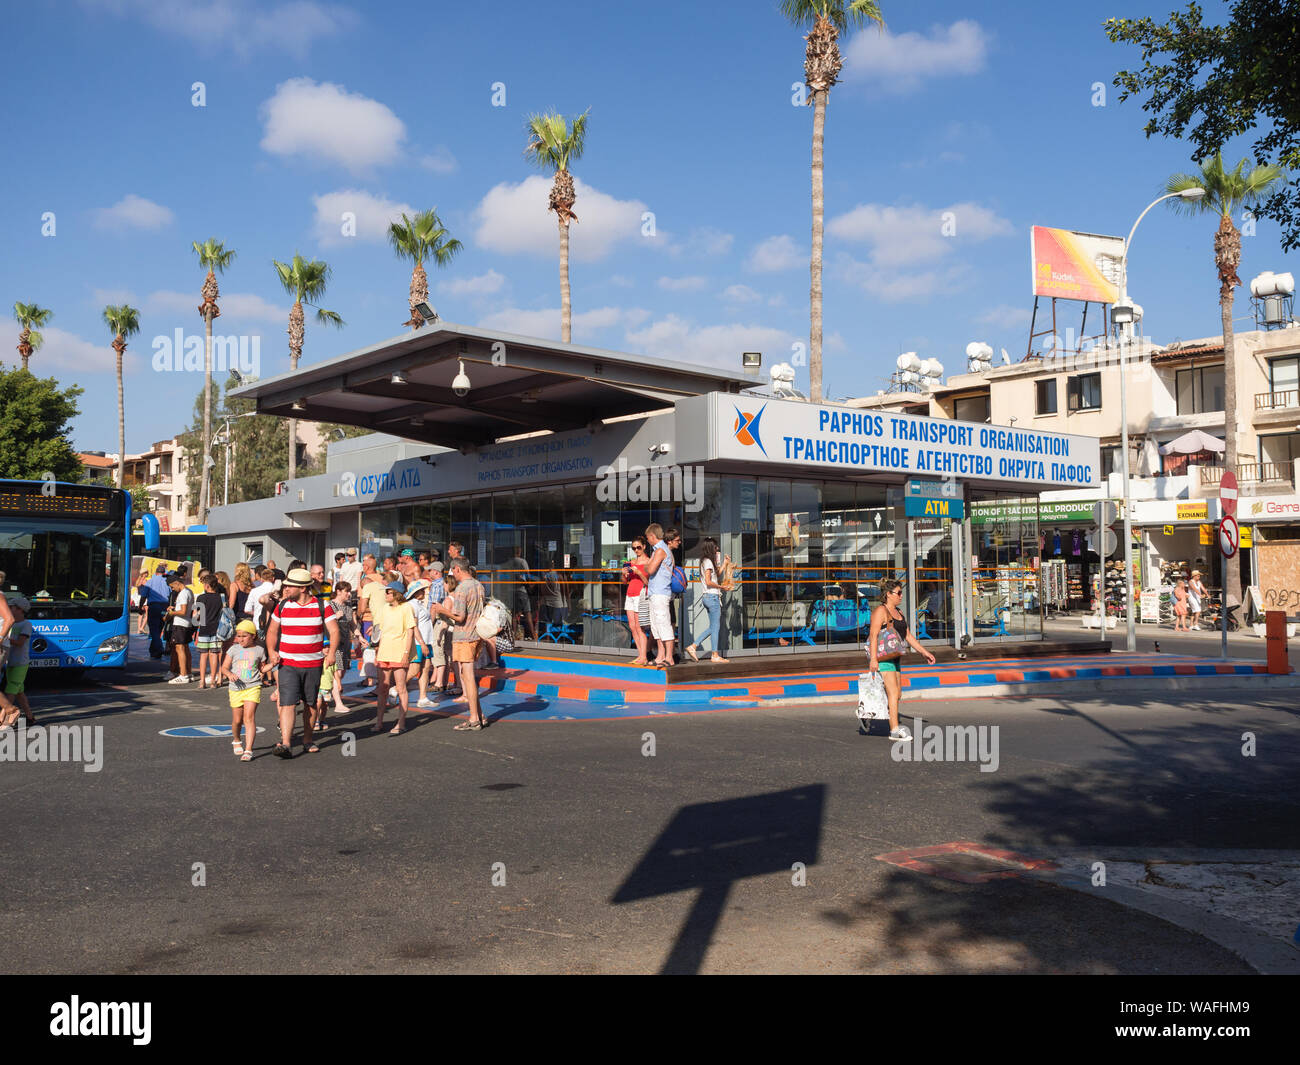 Pafos, Cyprus - July 15, 2016: People near Public bus station of Paphos Transport Organisation Stock Photo